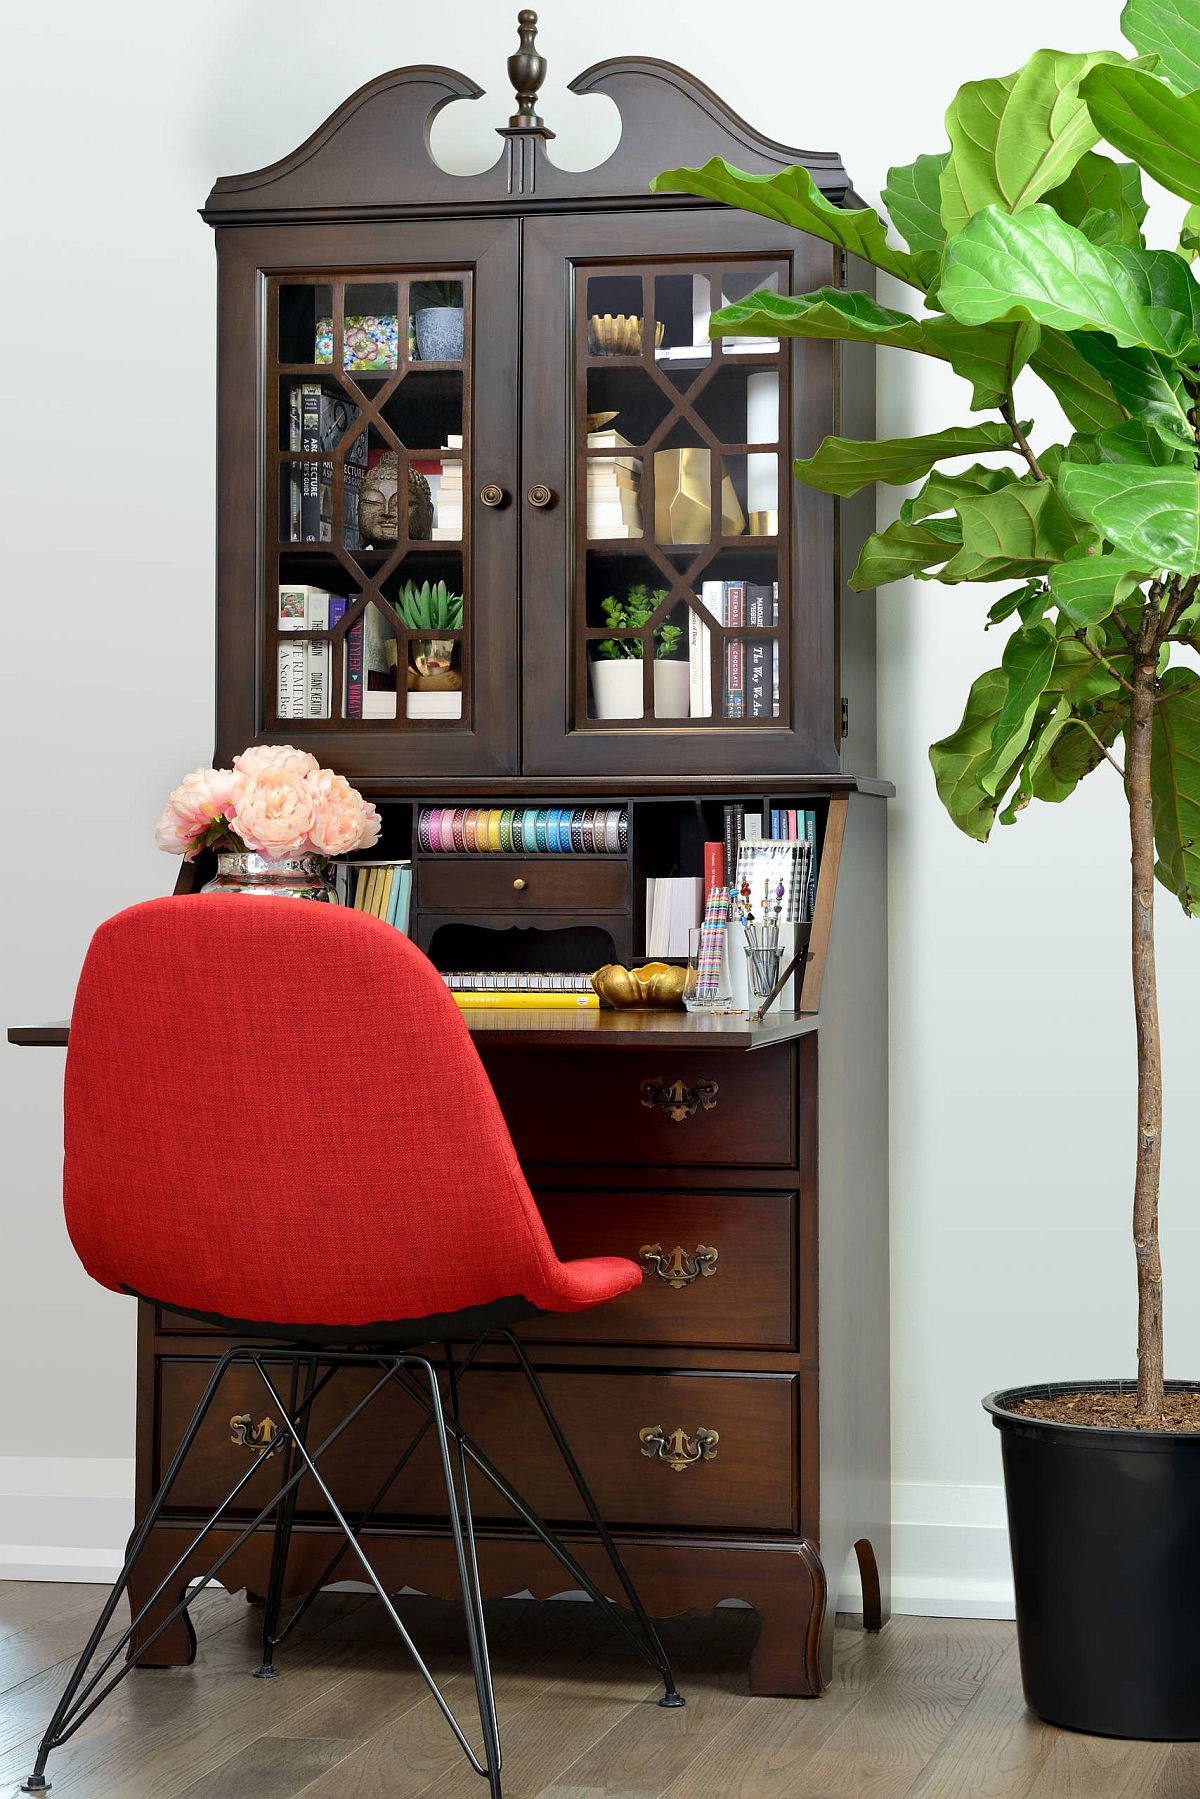 Freestanding wooden desk along with storage space creates this fabulous little crafing zone